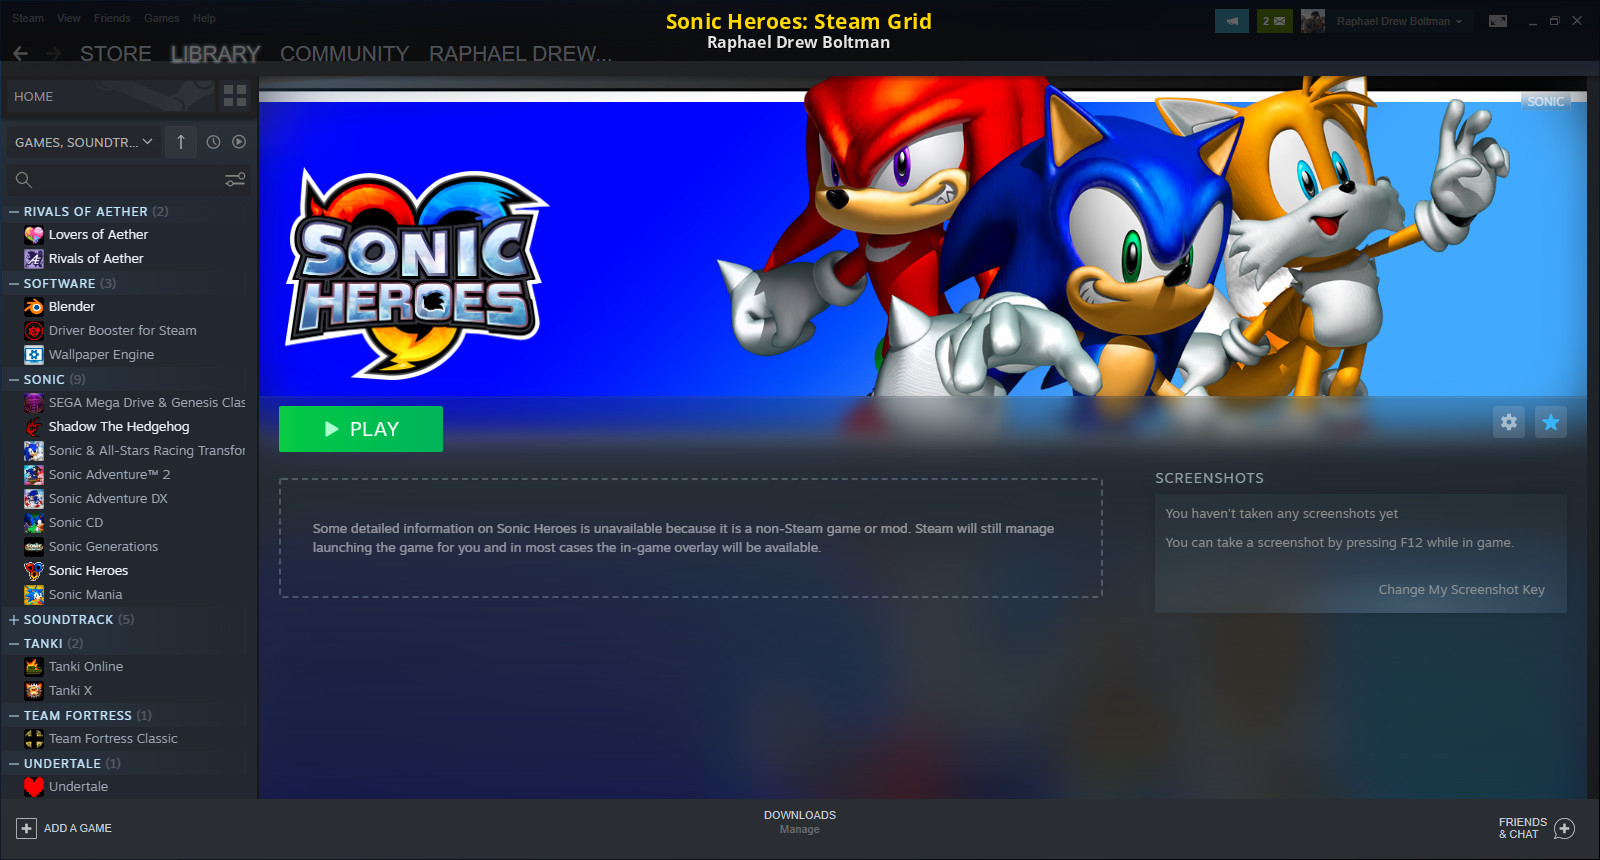 Sonic Mania Steam Key for PC - Buy now